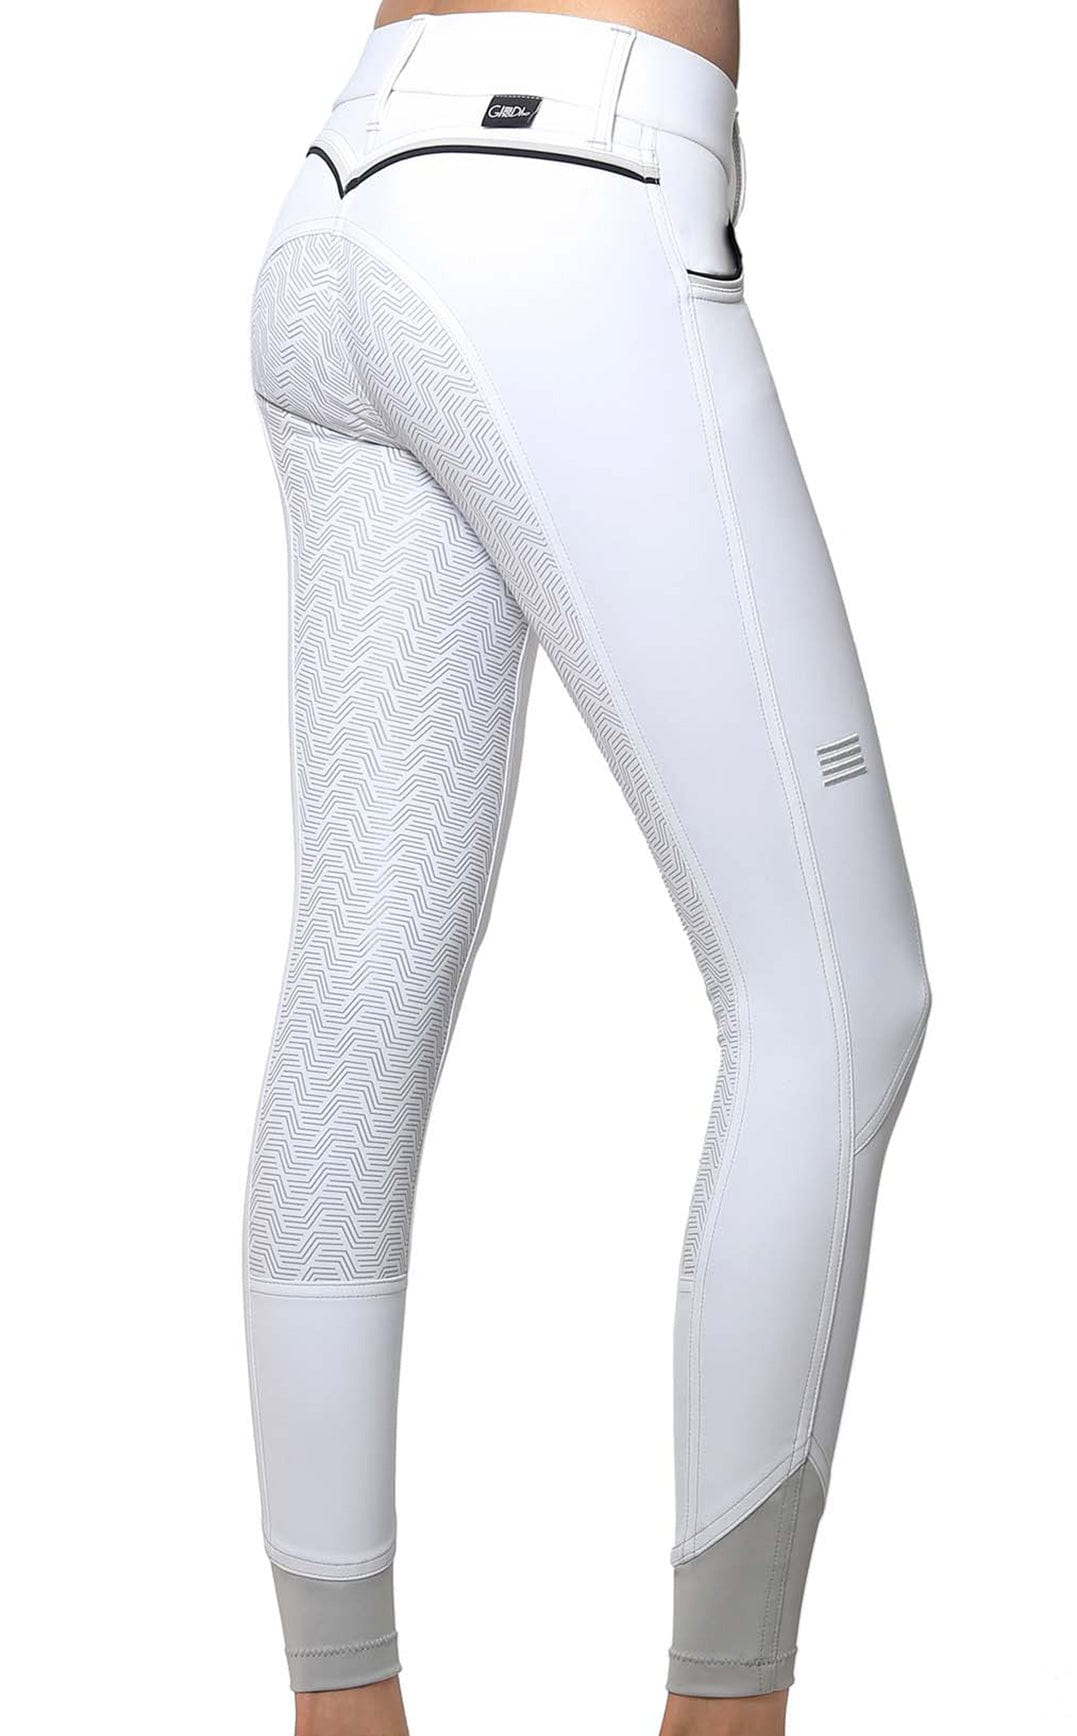 GhoDho Breeches GhoDho- Adena T-600 Full Seat Breeches White equestrian team apparel online tack store mobile tack store custom farm apparel custom show stable clothing equestrian lifestyle horse show clothing riding clothes horses equestrian tack store